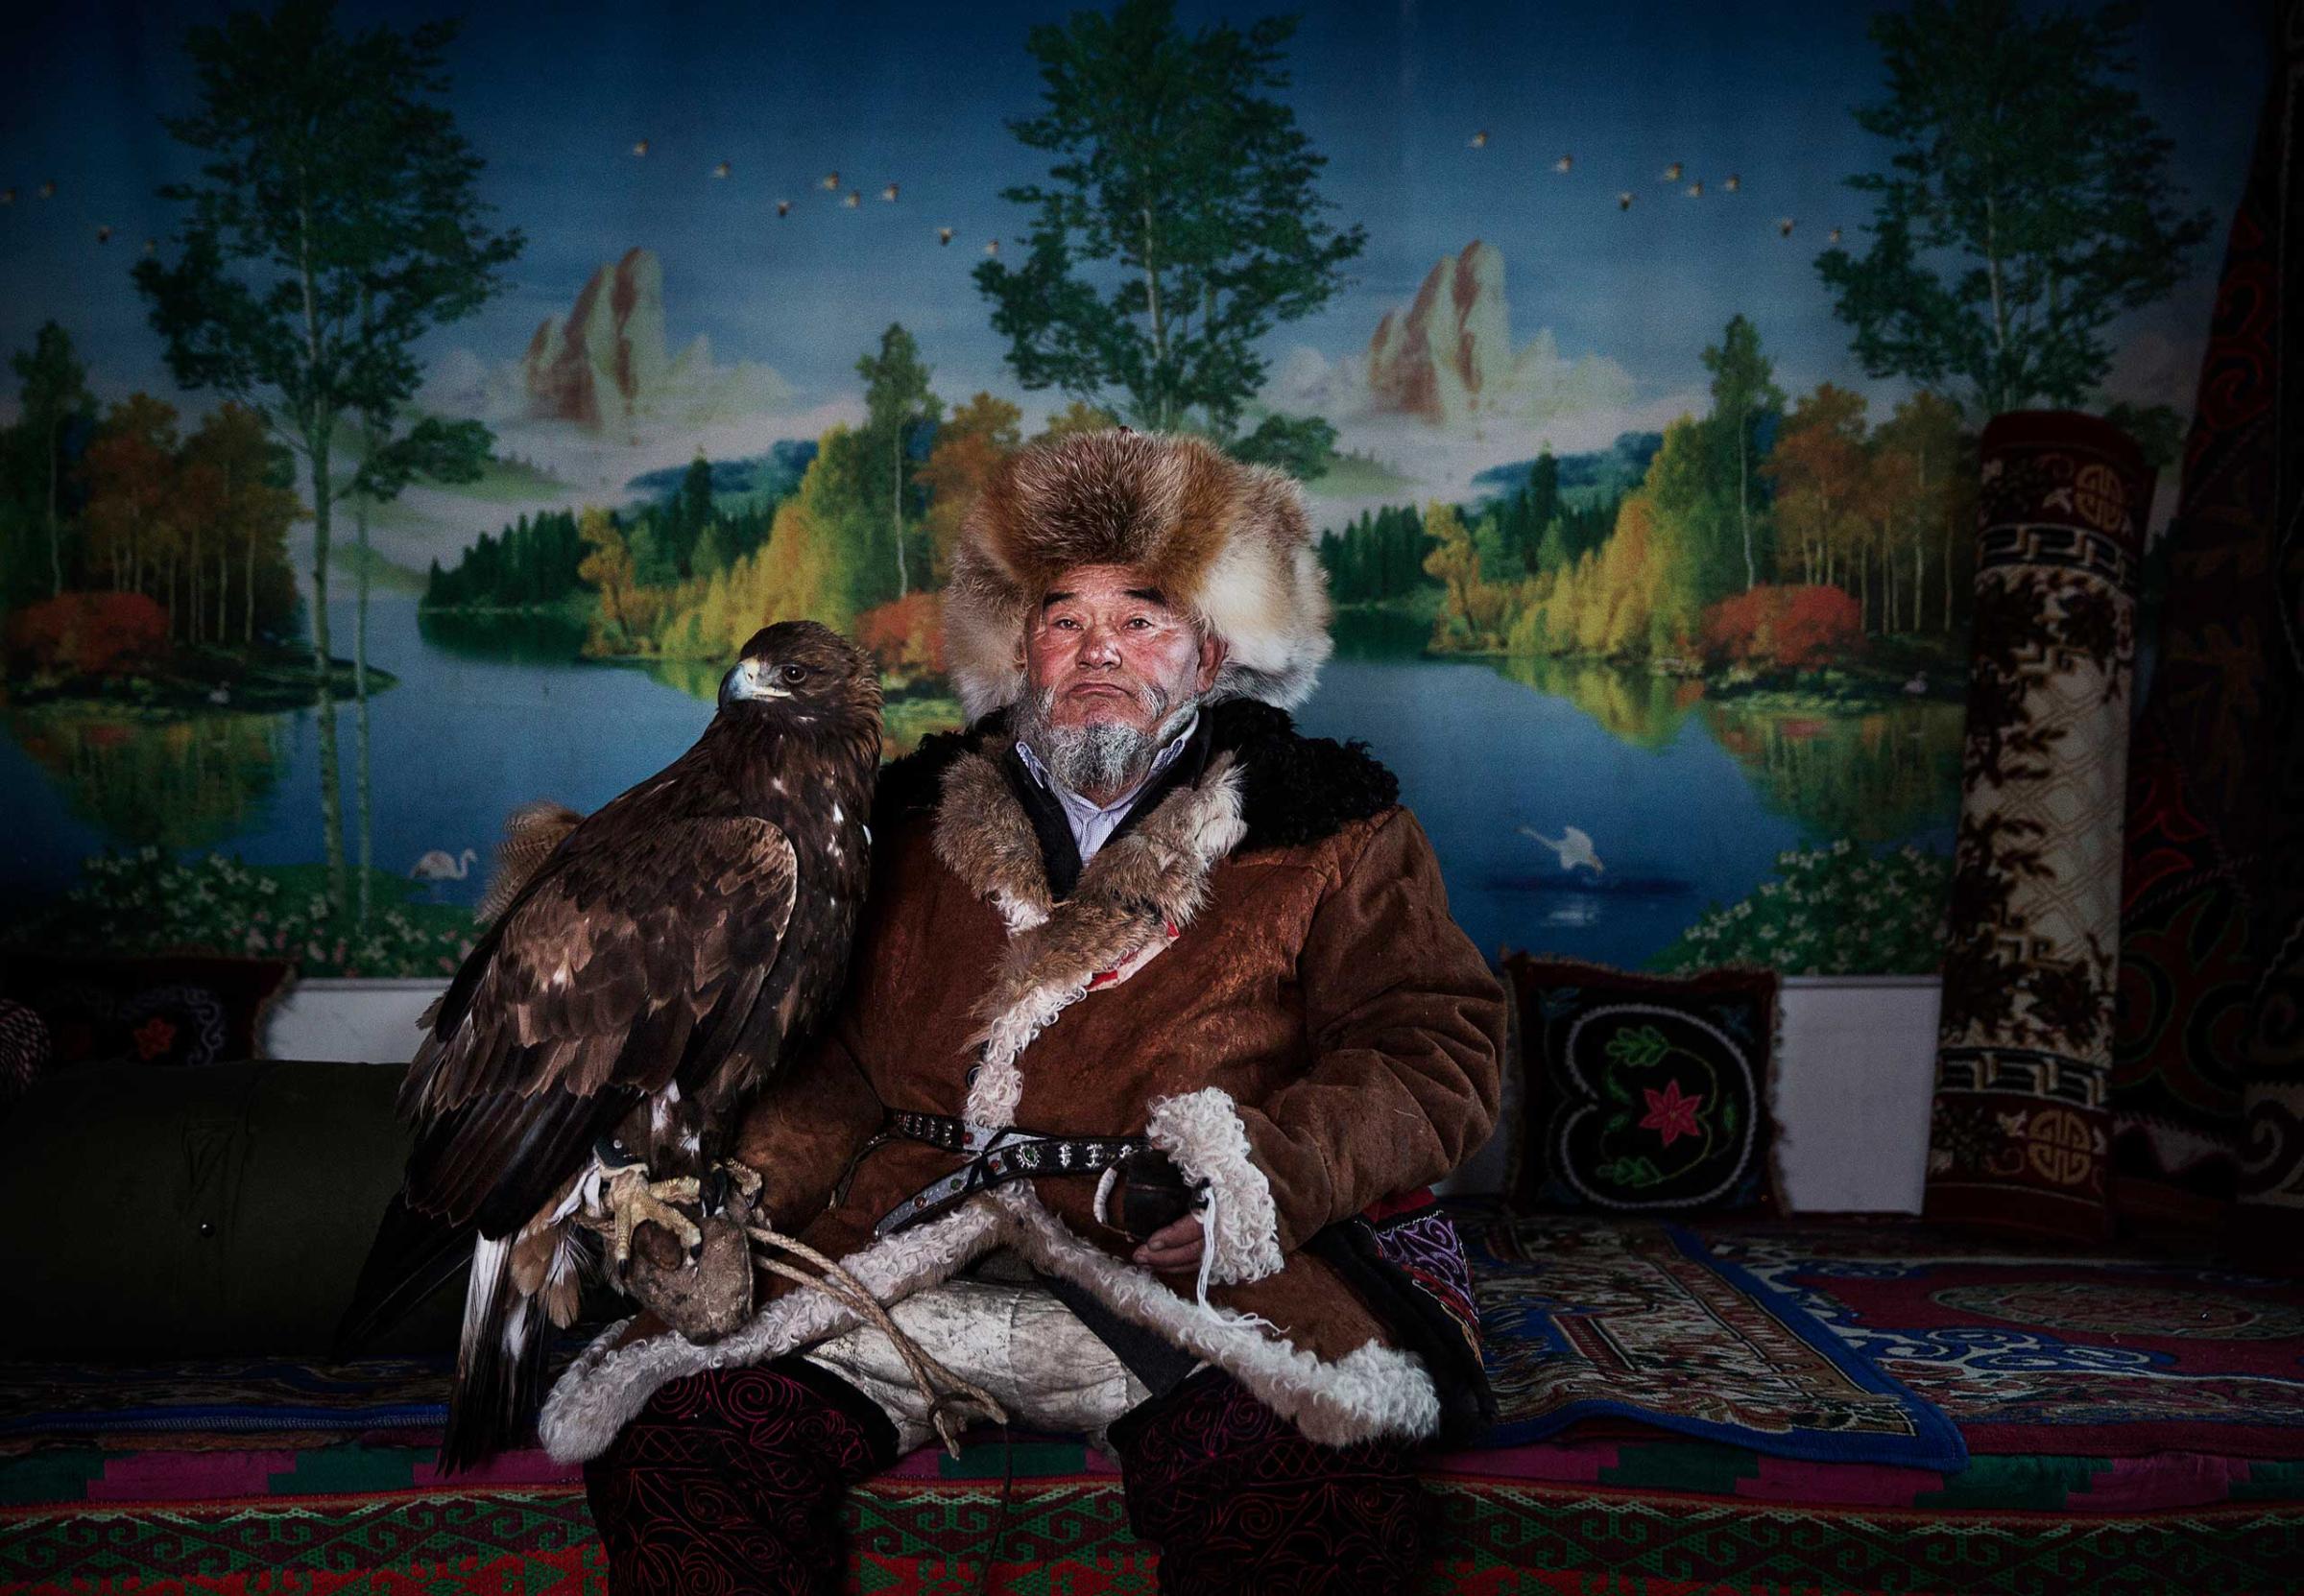 Chinese Kazakh eagle hunter Margars Mazkin, 74 years, sits with his eagle before leaving for competition in the mountains of Qinghe County, Xinjiang, northwestern China., Jan. 31, 2015.